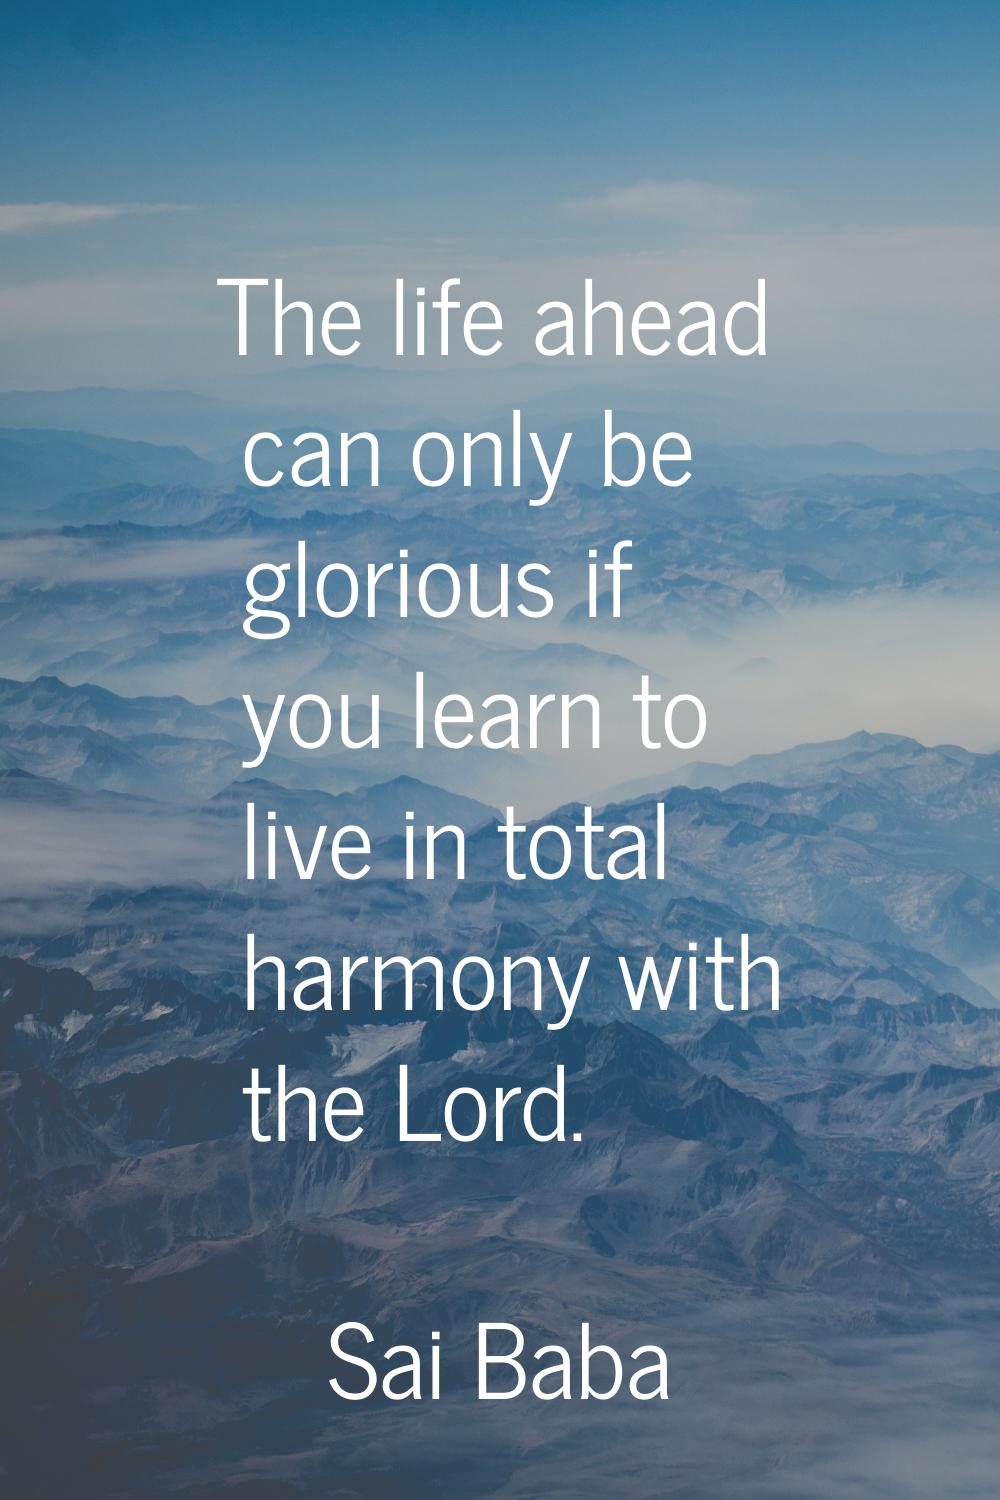 The life ahead can only be glorious if you learn to live in total harmony with the Lord.